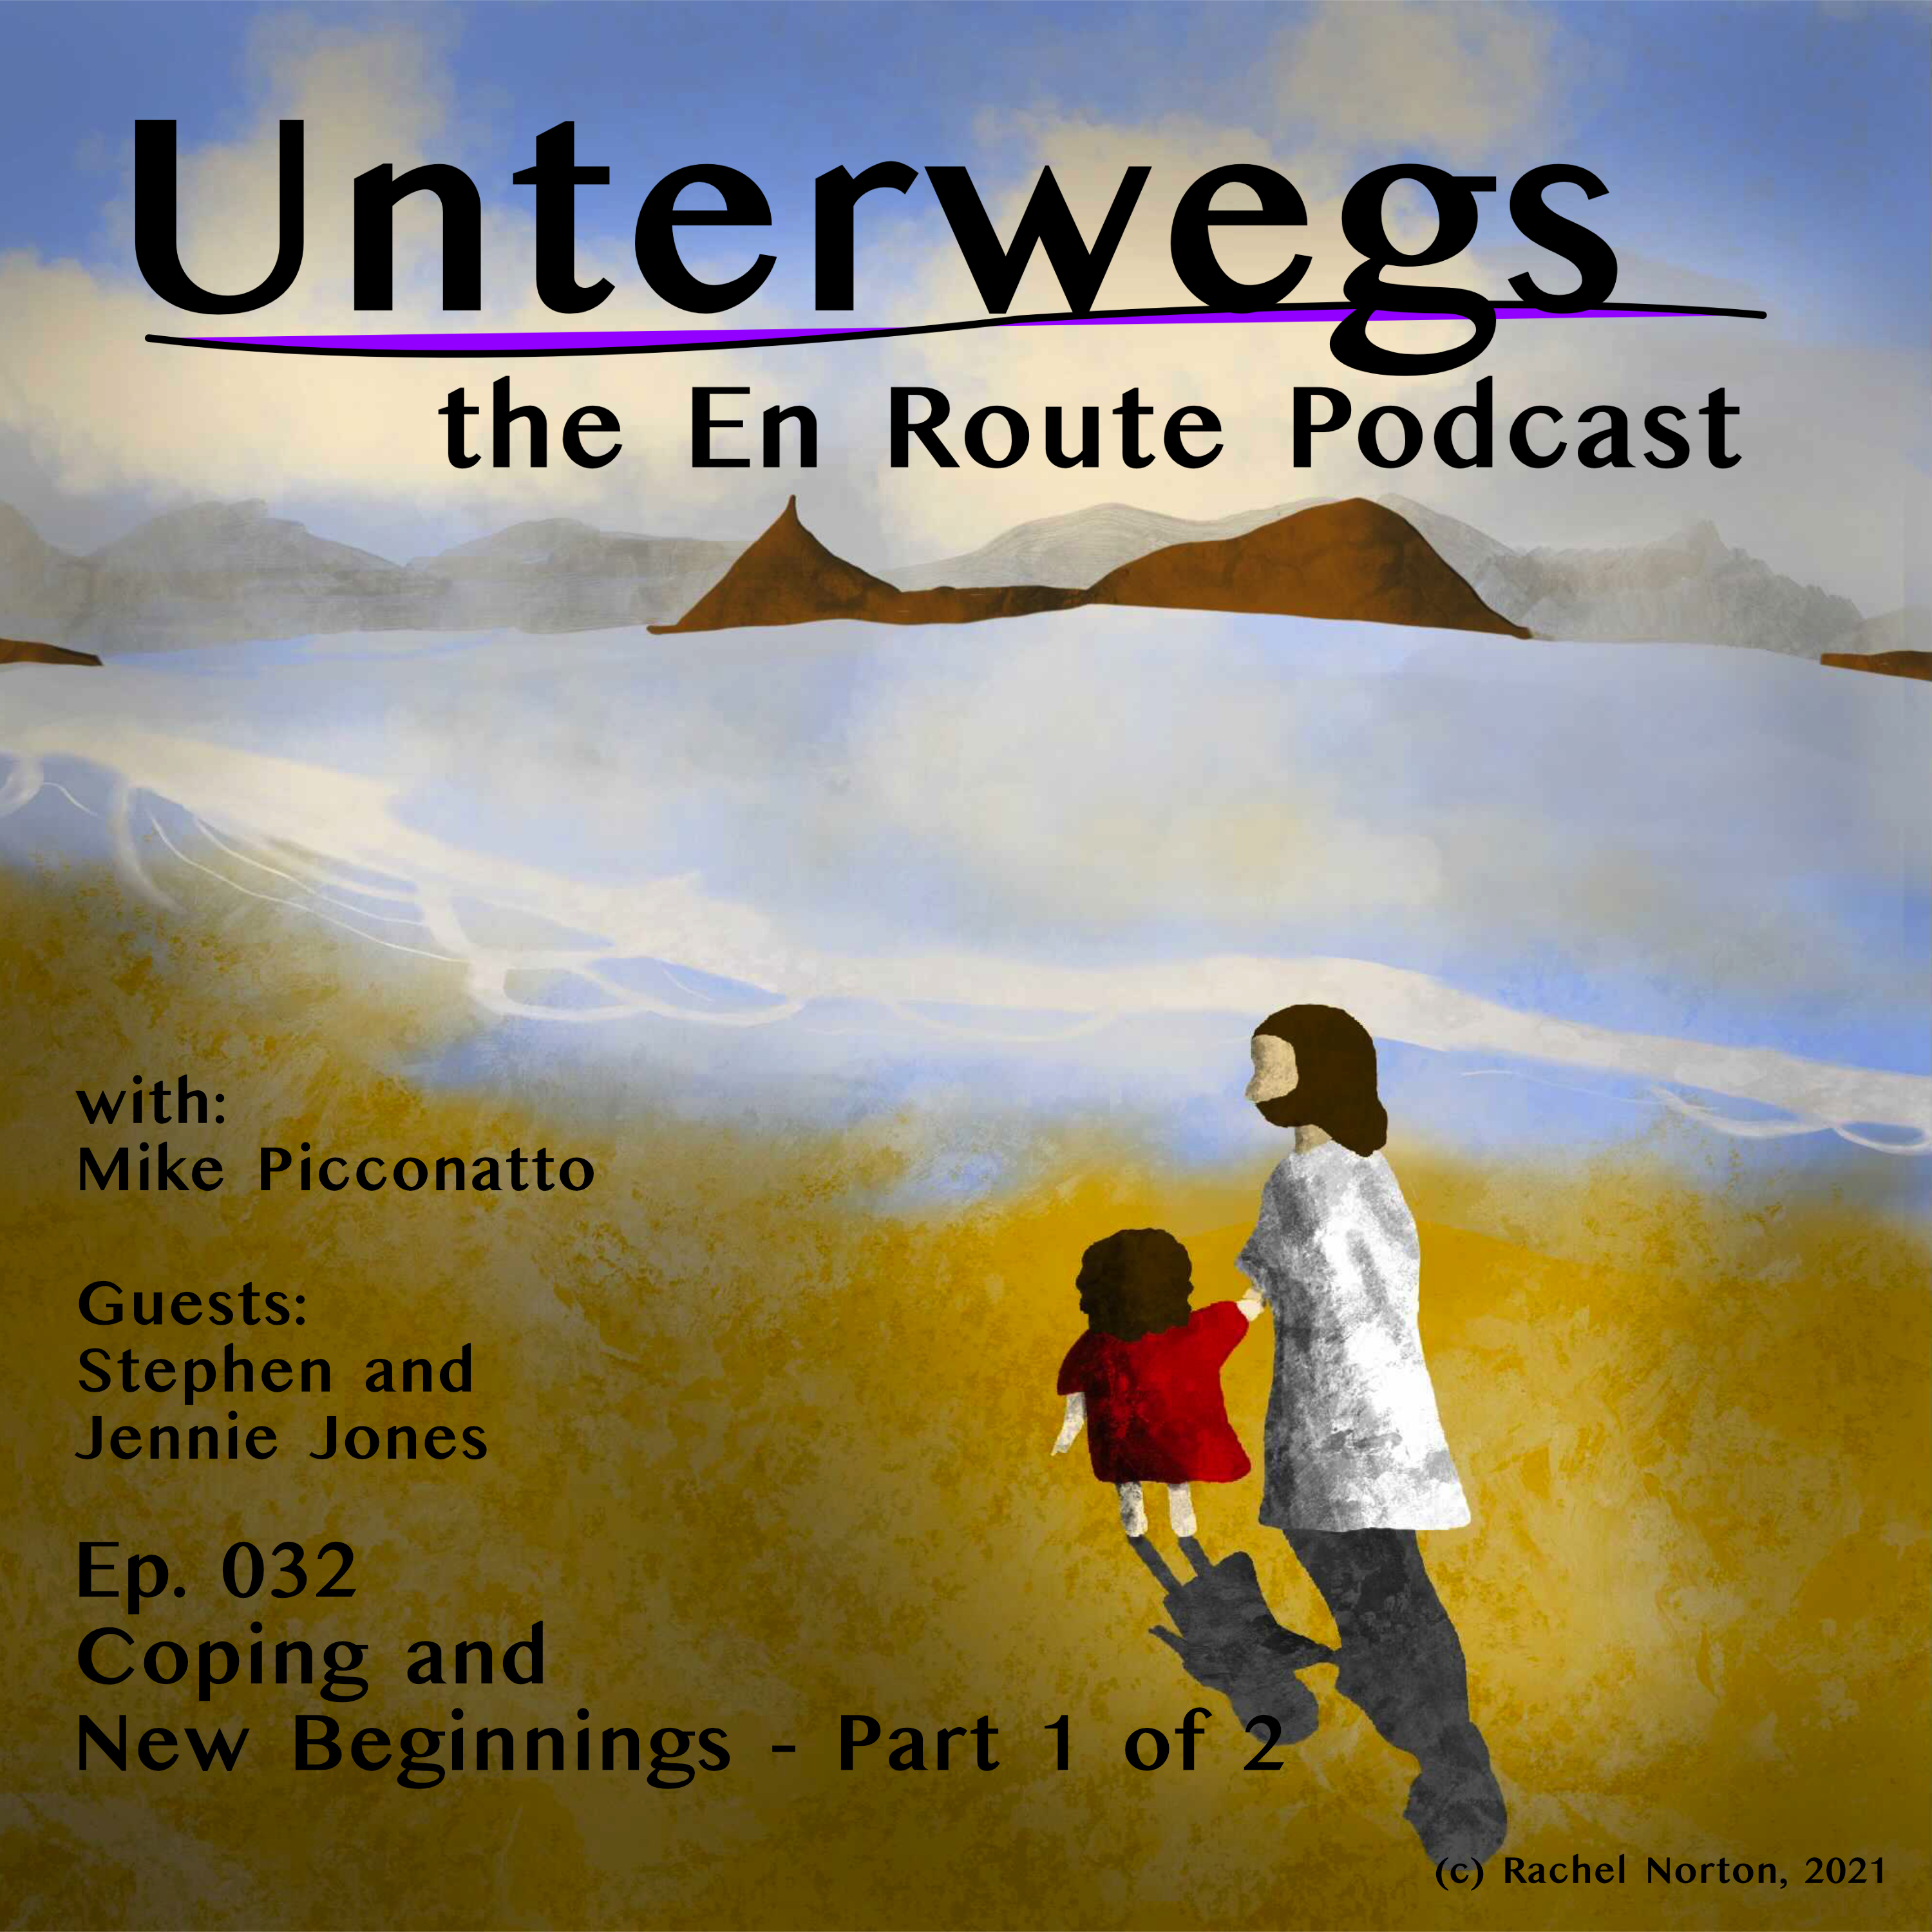 Episode 032 - Cultural Transitions - Coping and New Beginnings - Part 1 of 2